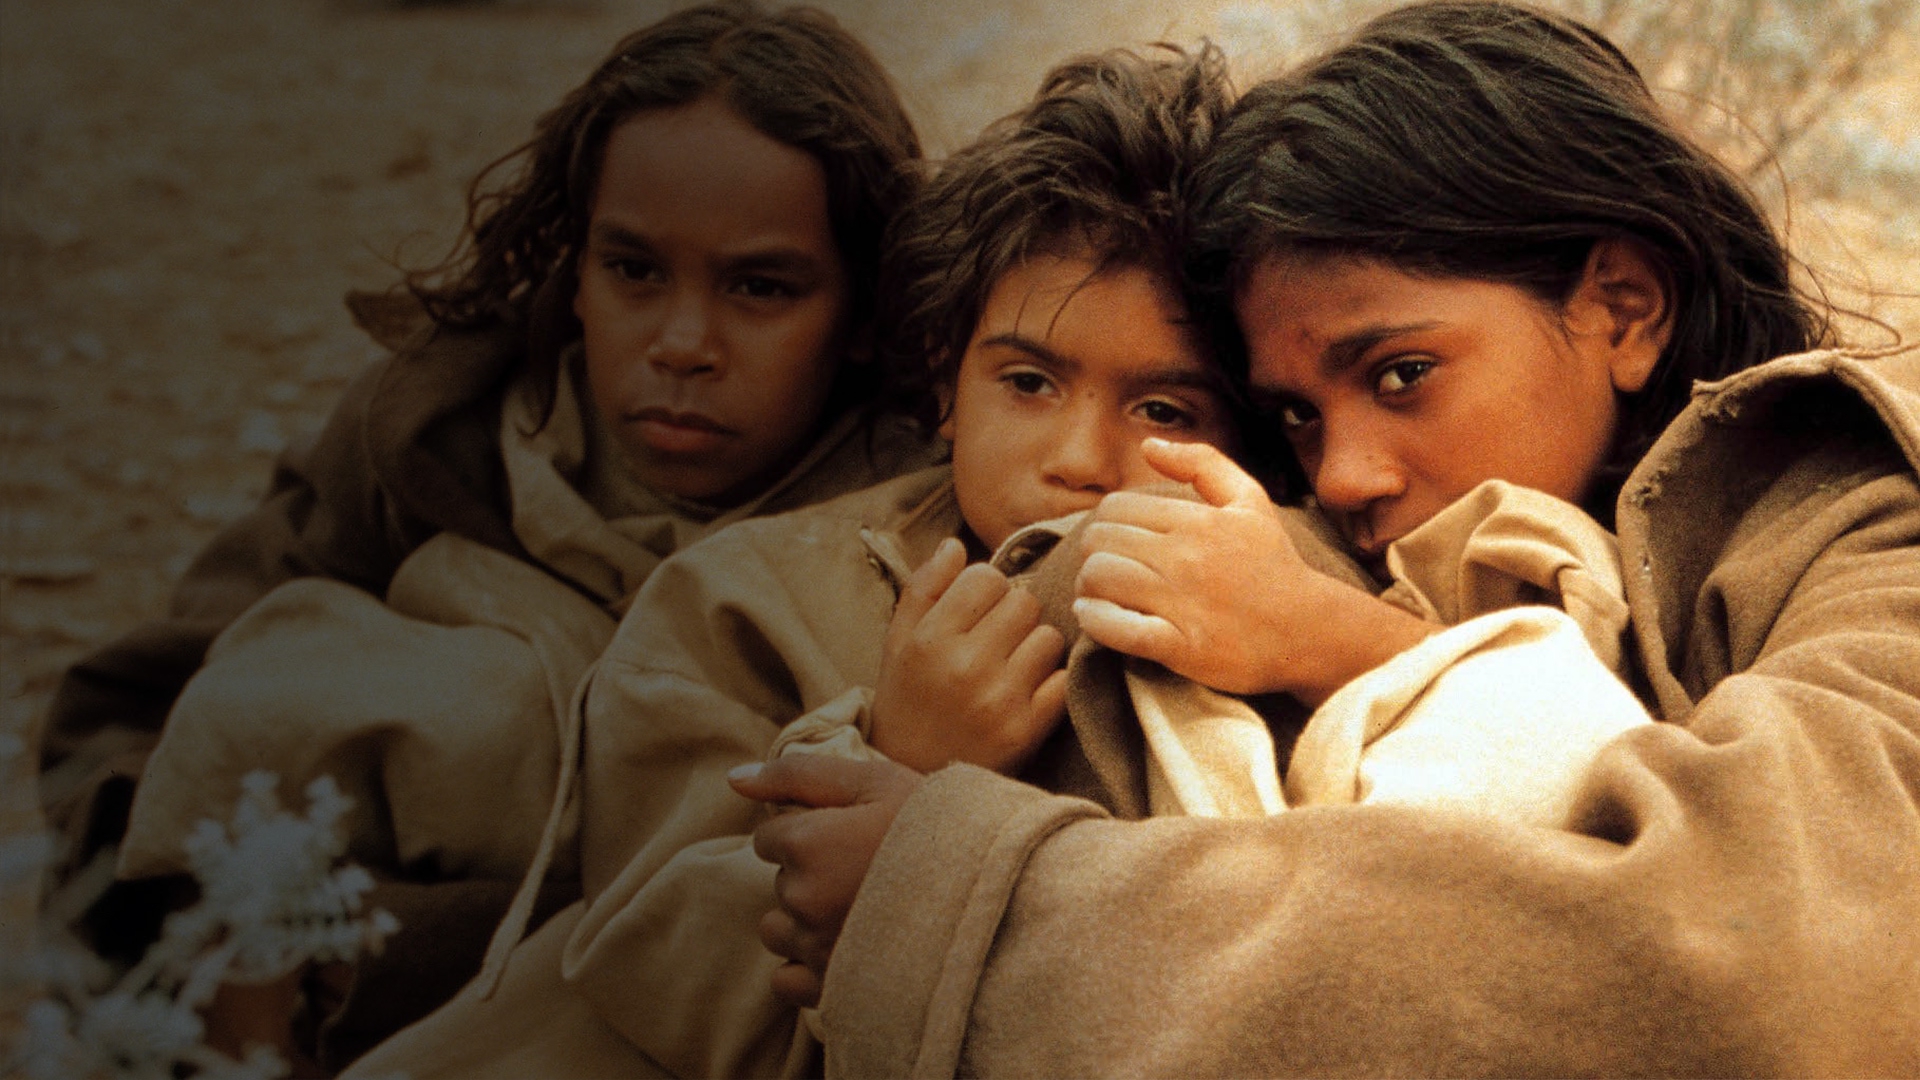 rabbit proof fence streaming free